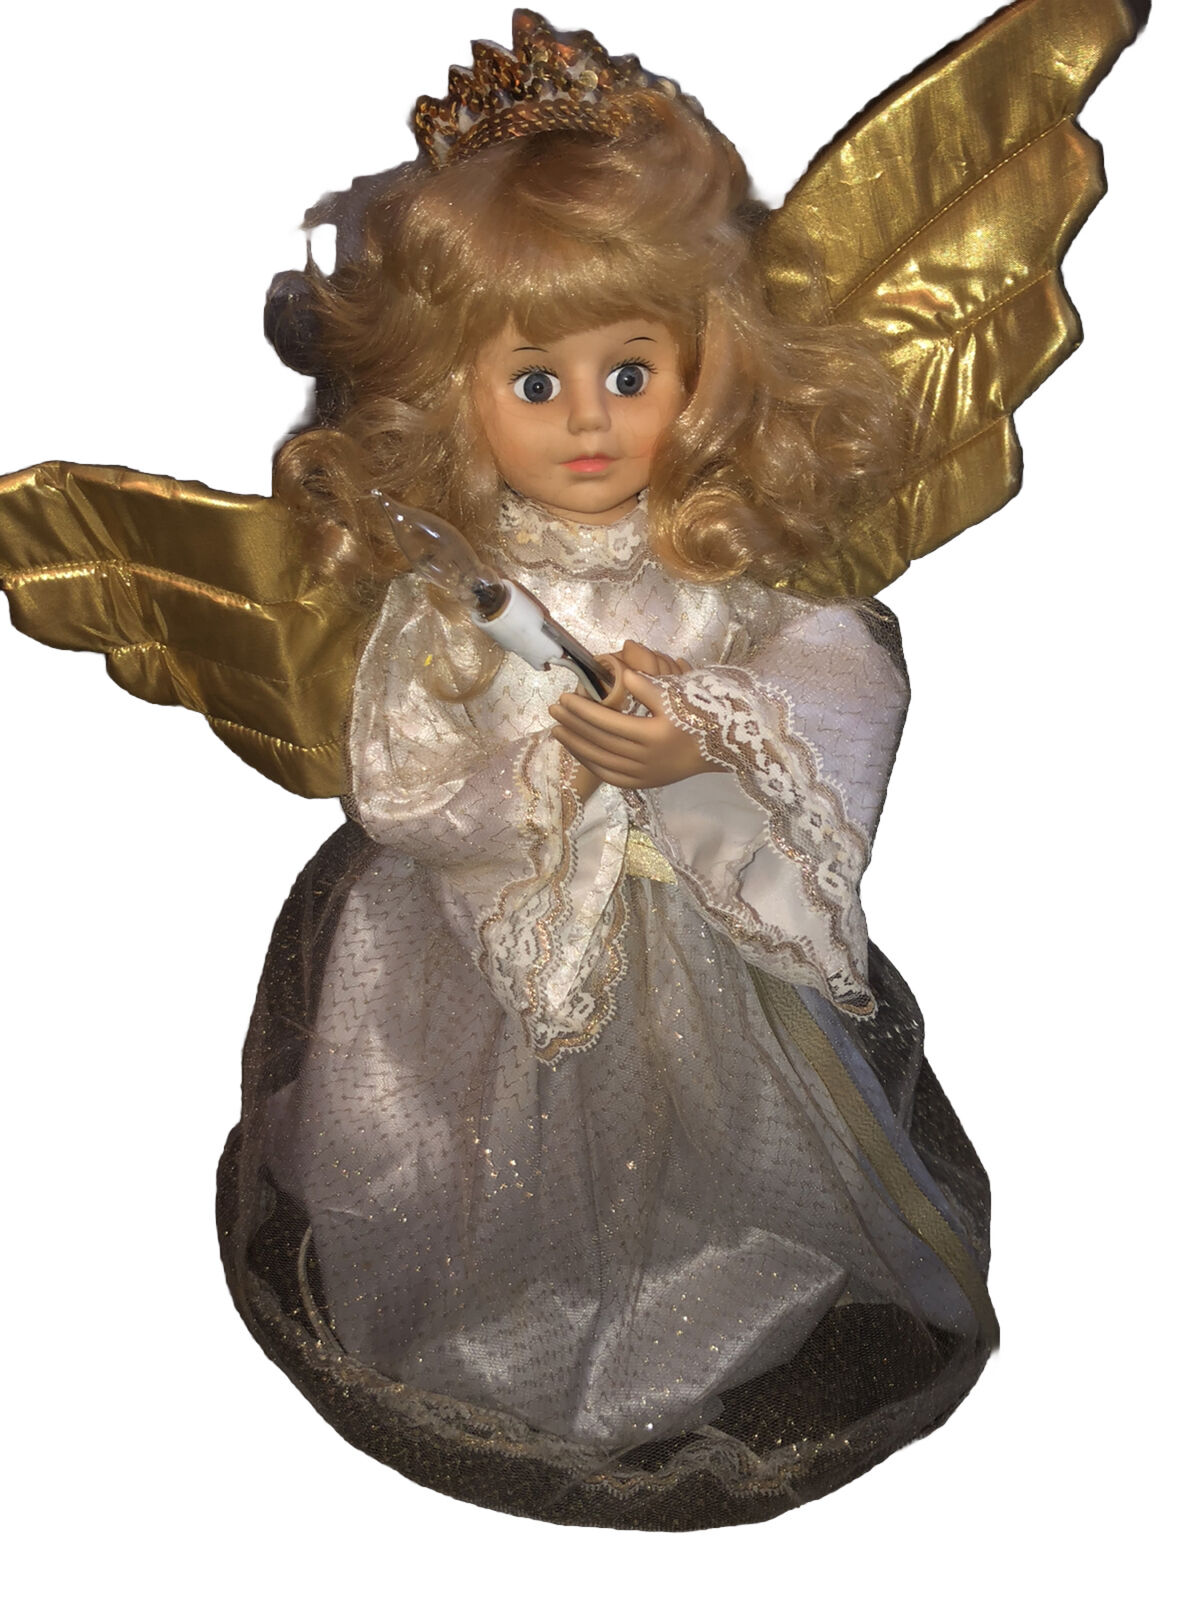 Telco Motionettes Interactive Motion and Music Large Angel 1980s